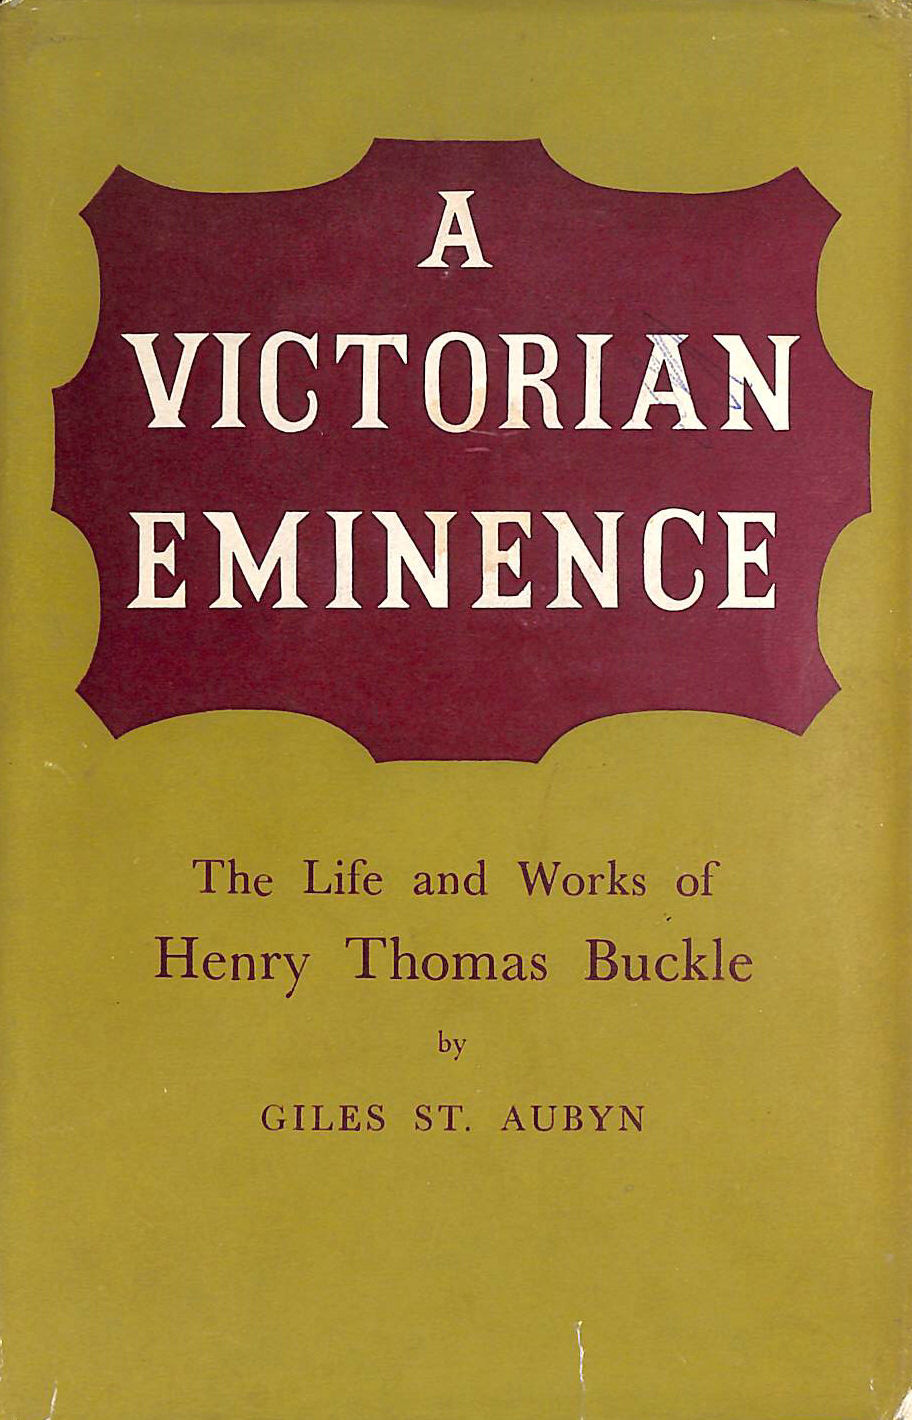 GILES ST. AUBYN - A Victorian Eminence: The Life and Works of Henry Thomas Buckle